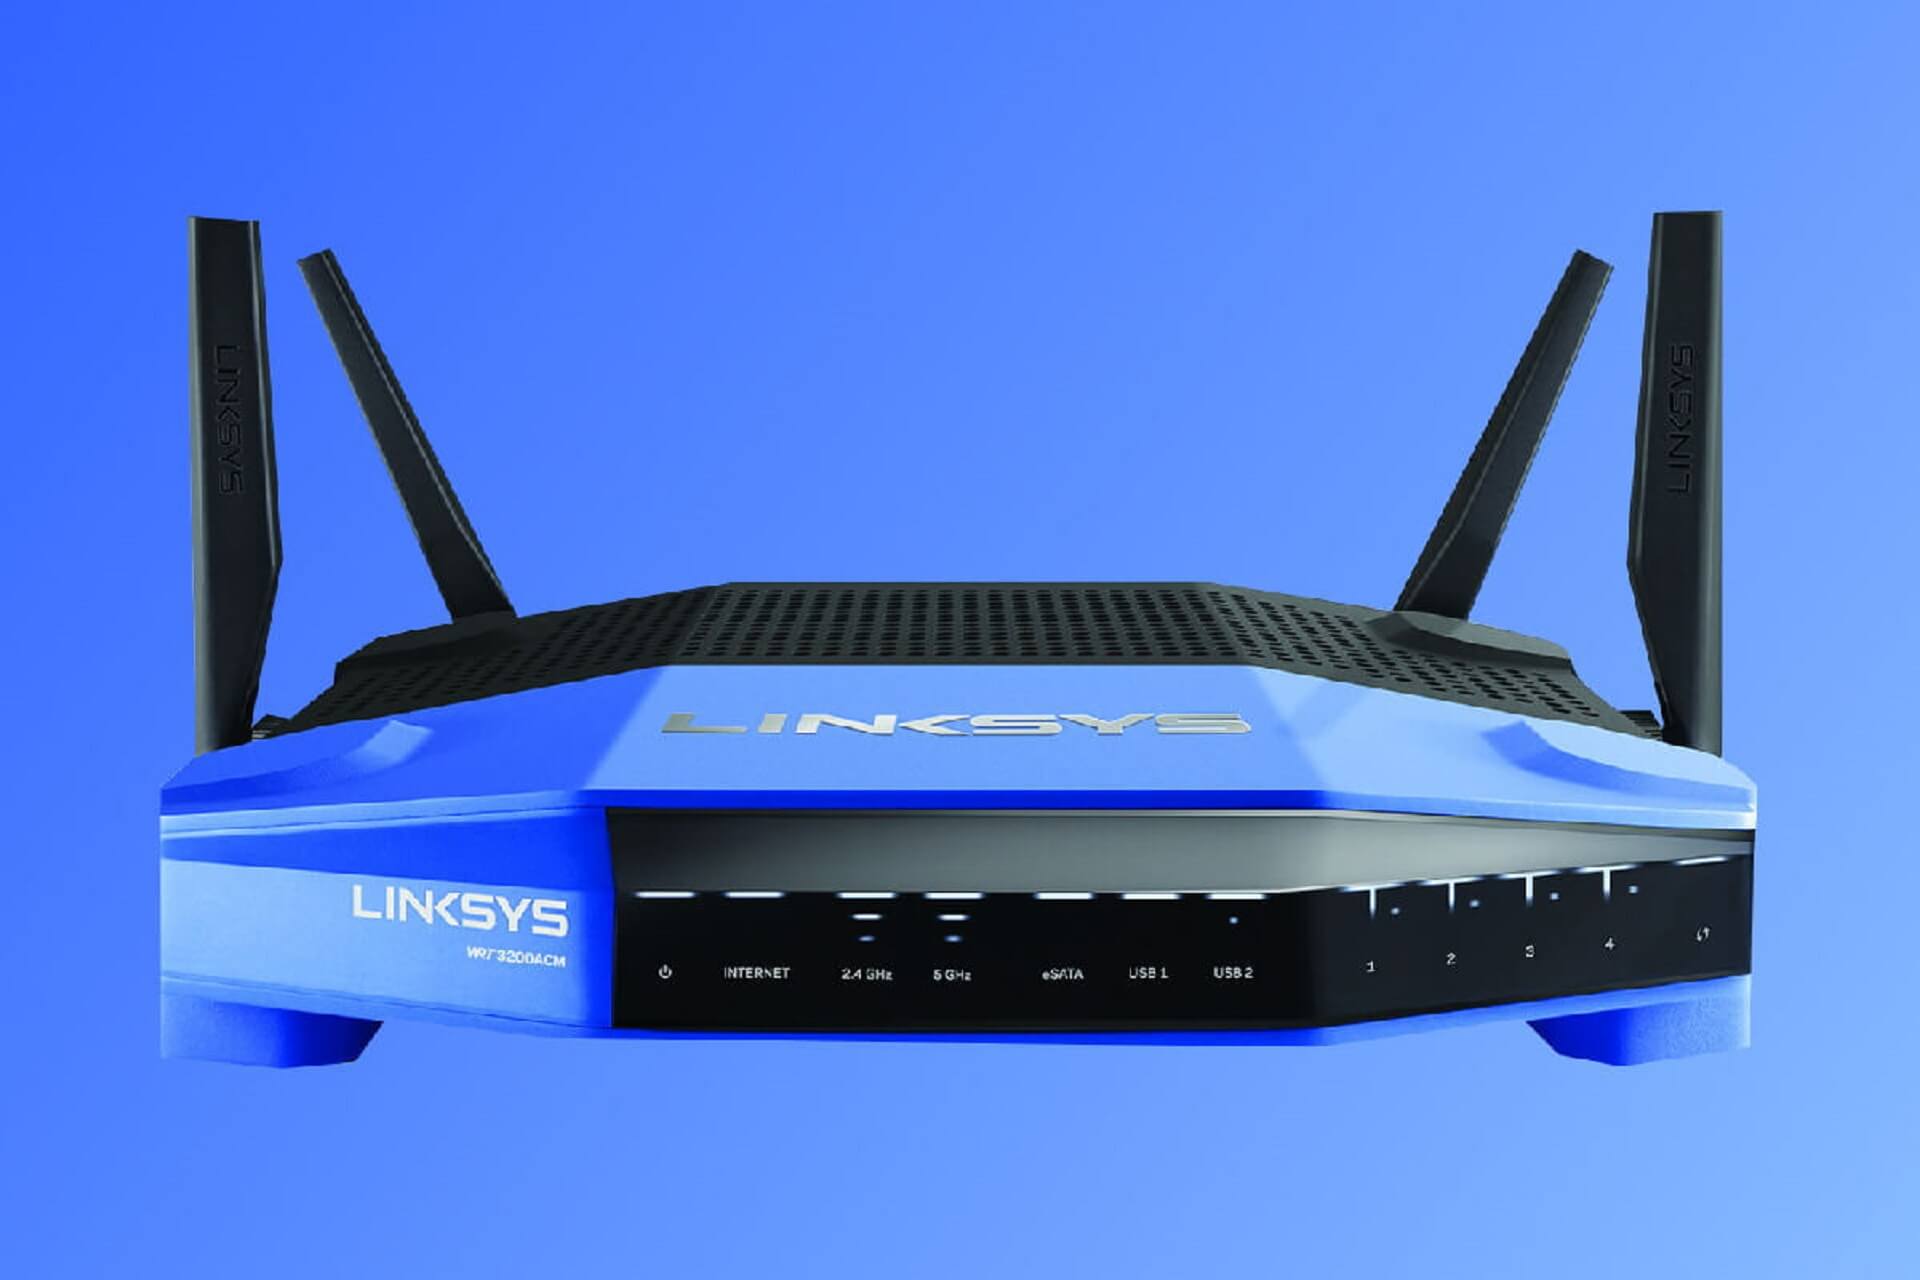 VPNs for Linksys routers